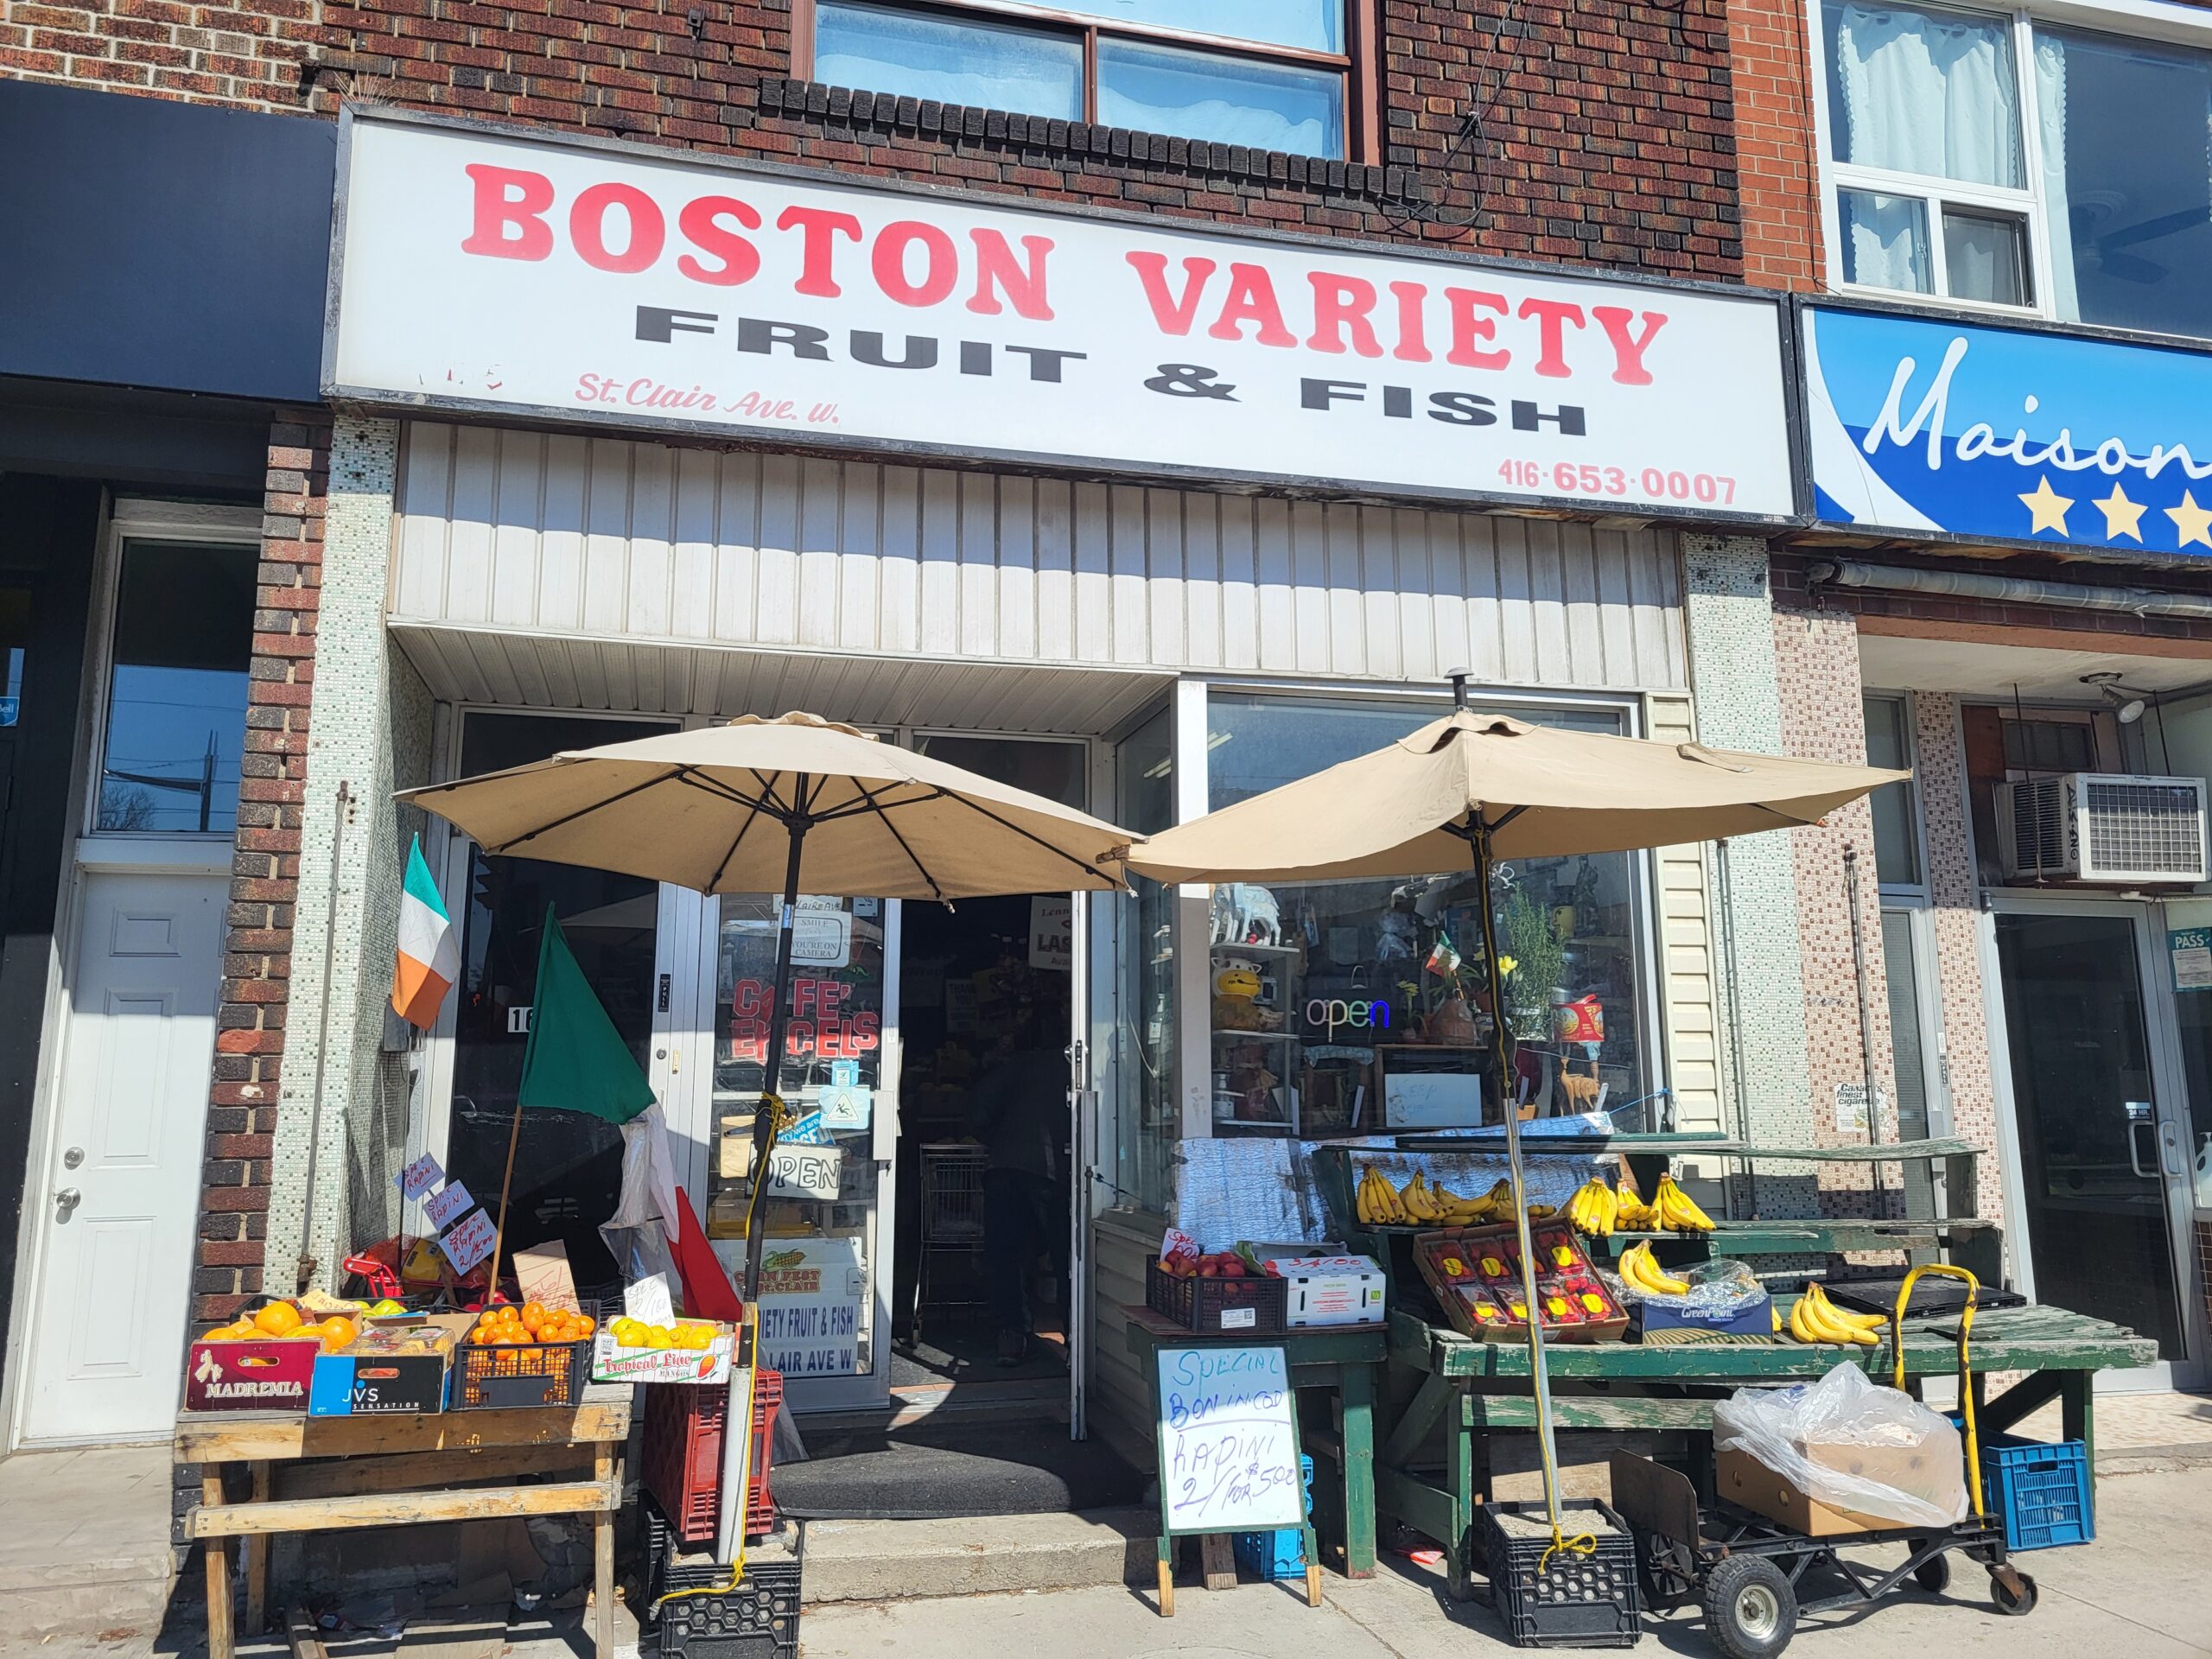 Featured image for “Boston Variety Fish & Fruit”